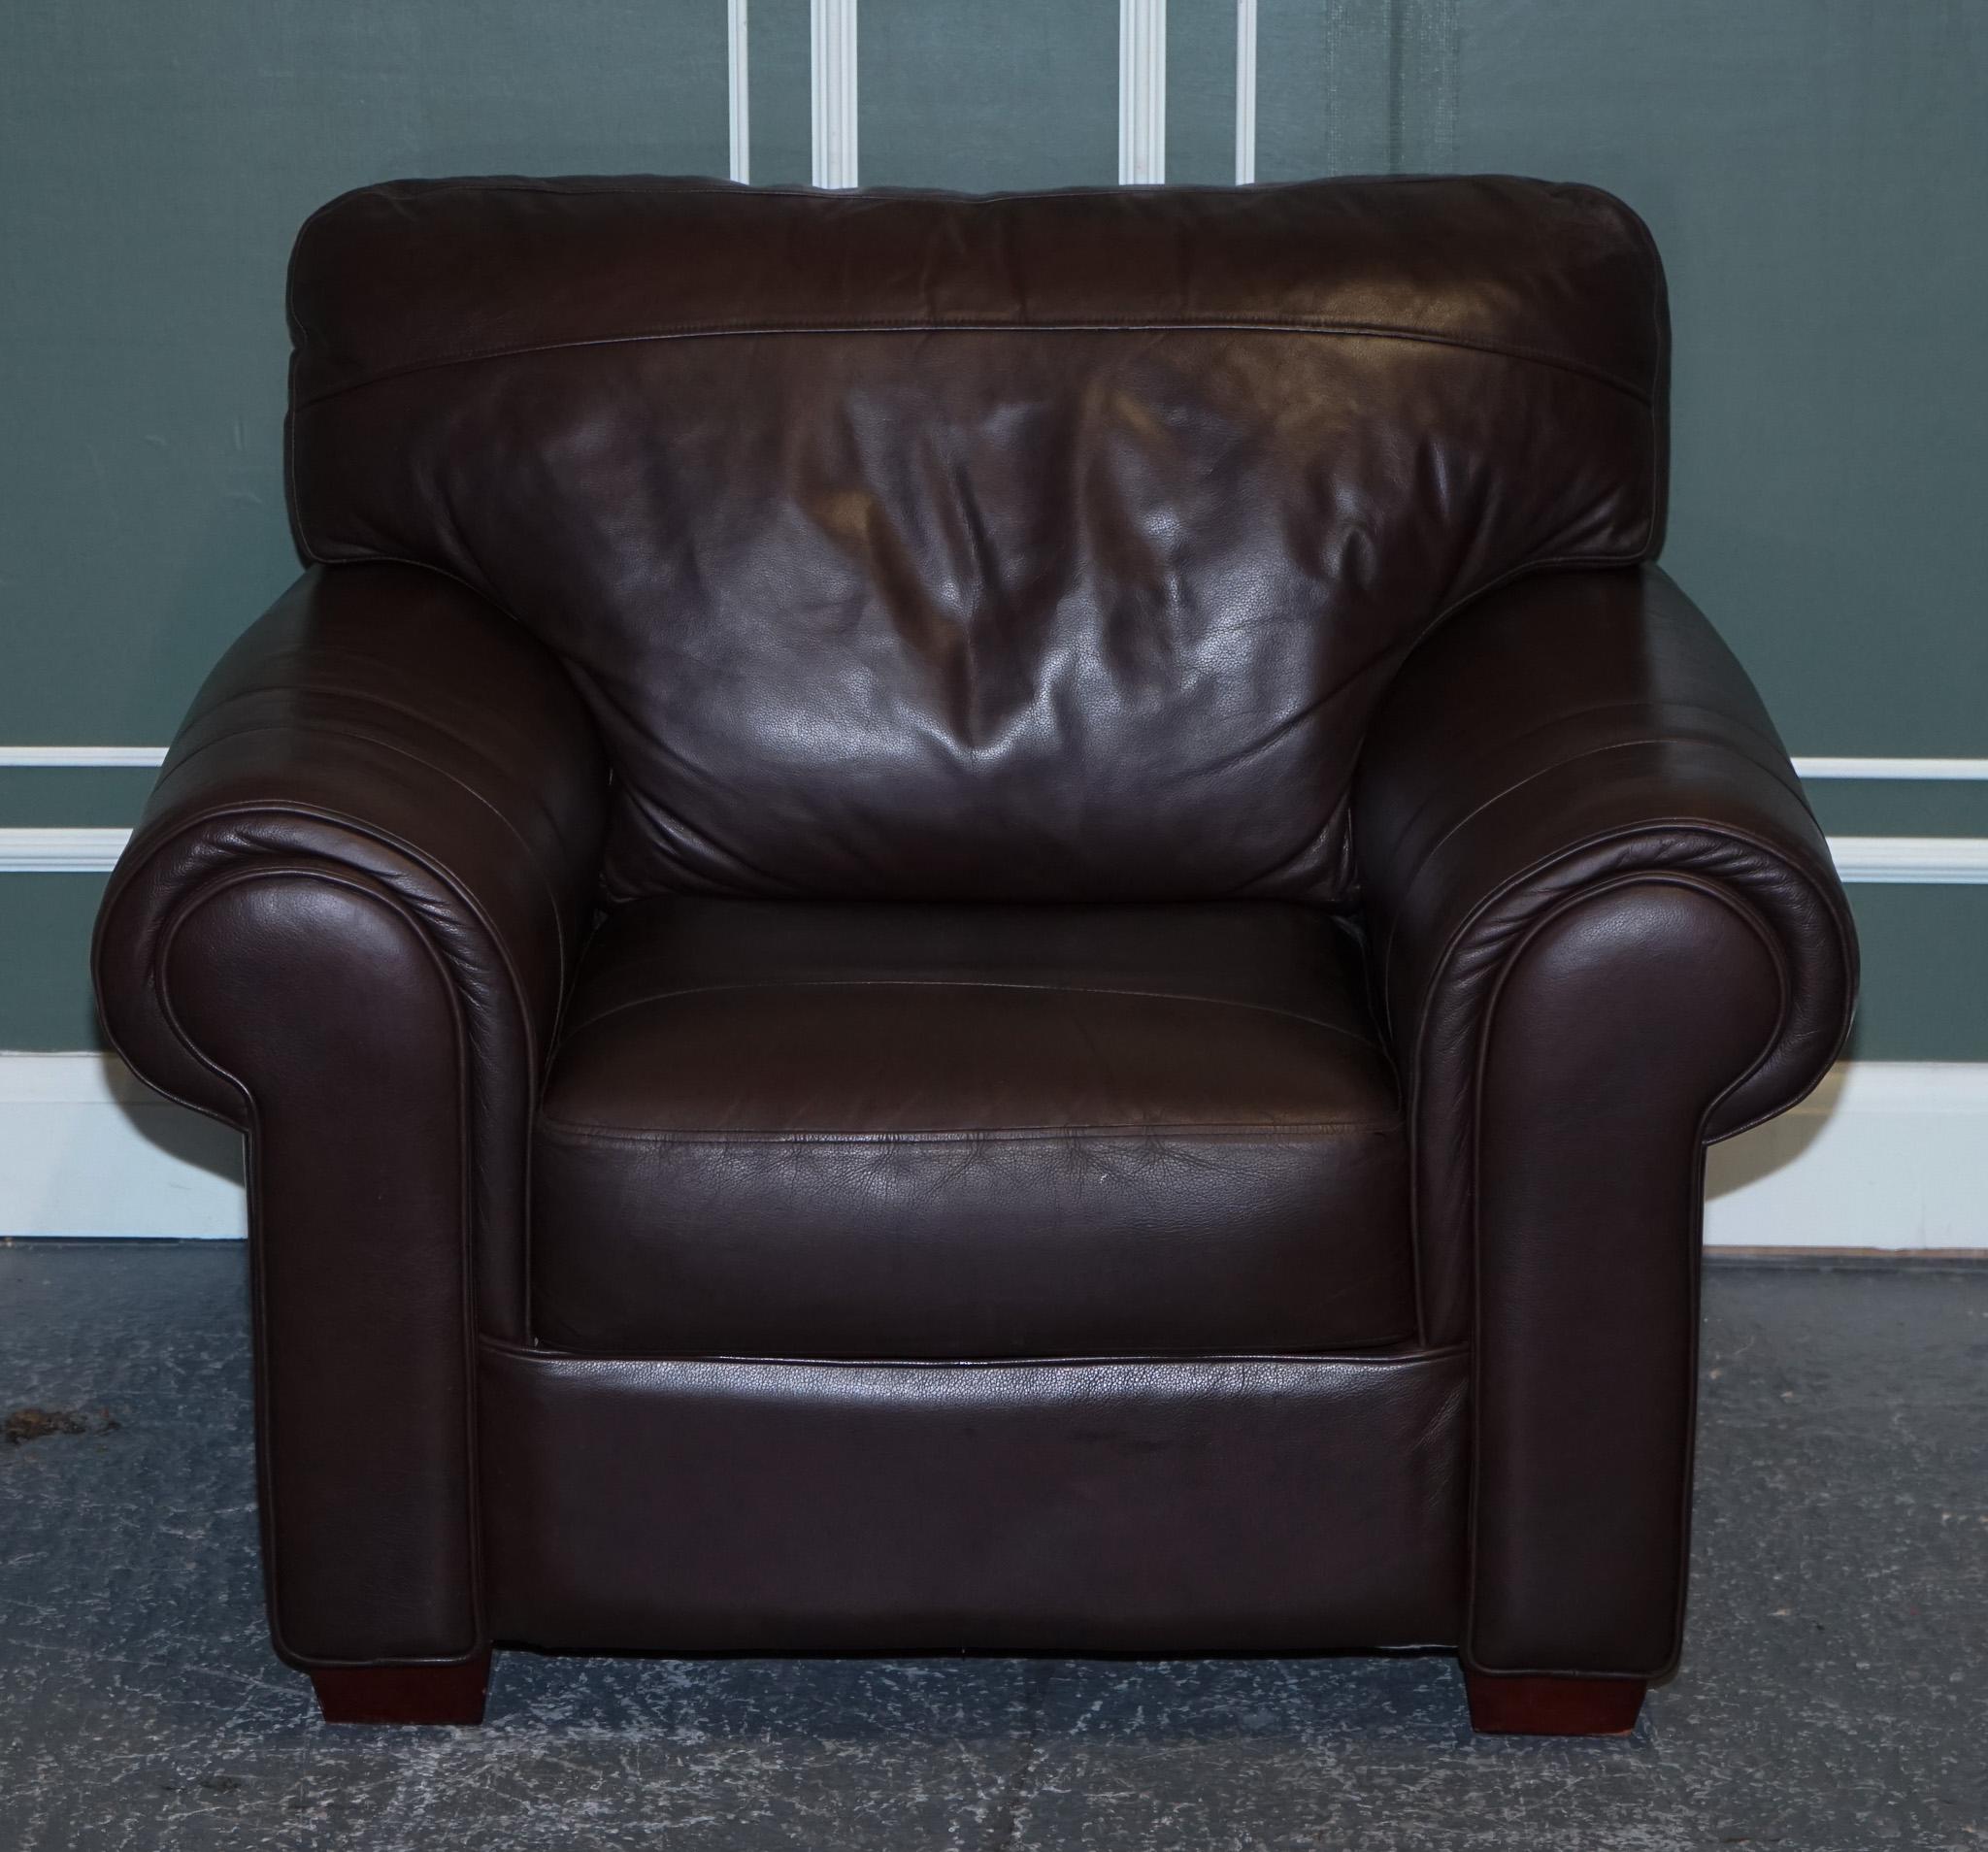 British PAIR OF LARGE COMFORTABLE BROWN LEATHER ARMCHAIRS, MATCHiNG SOFA AVAILABLE For Sale